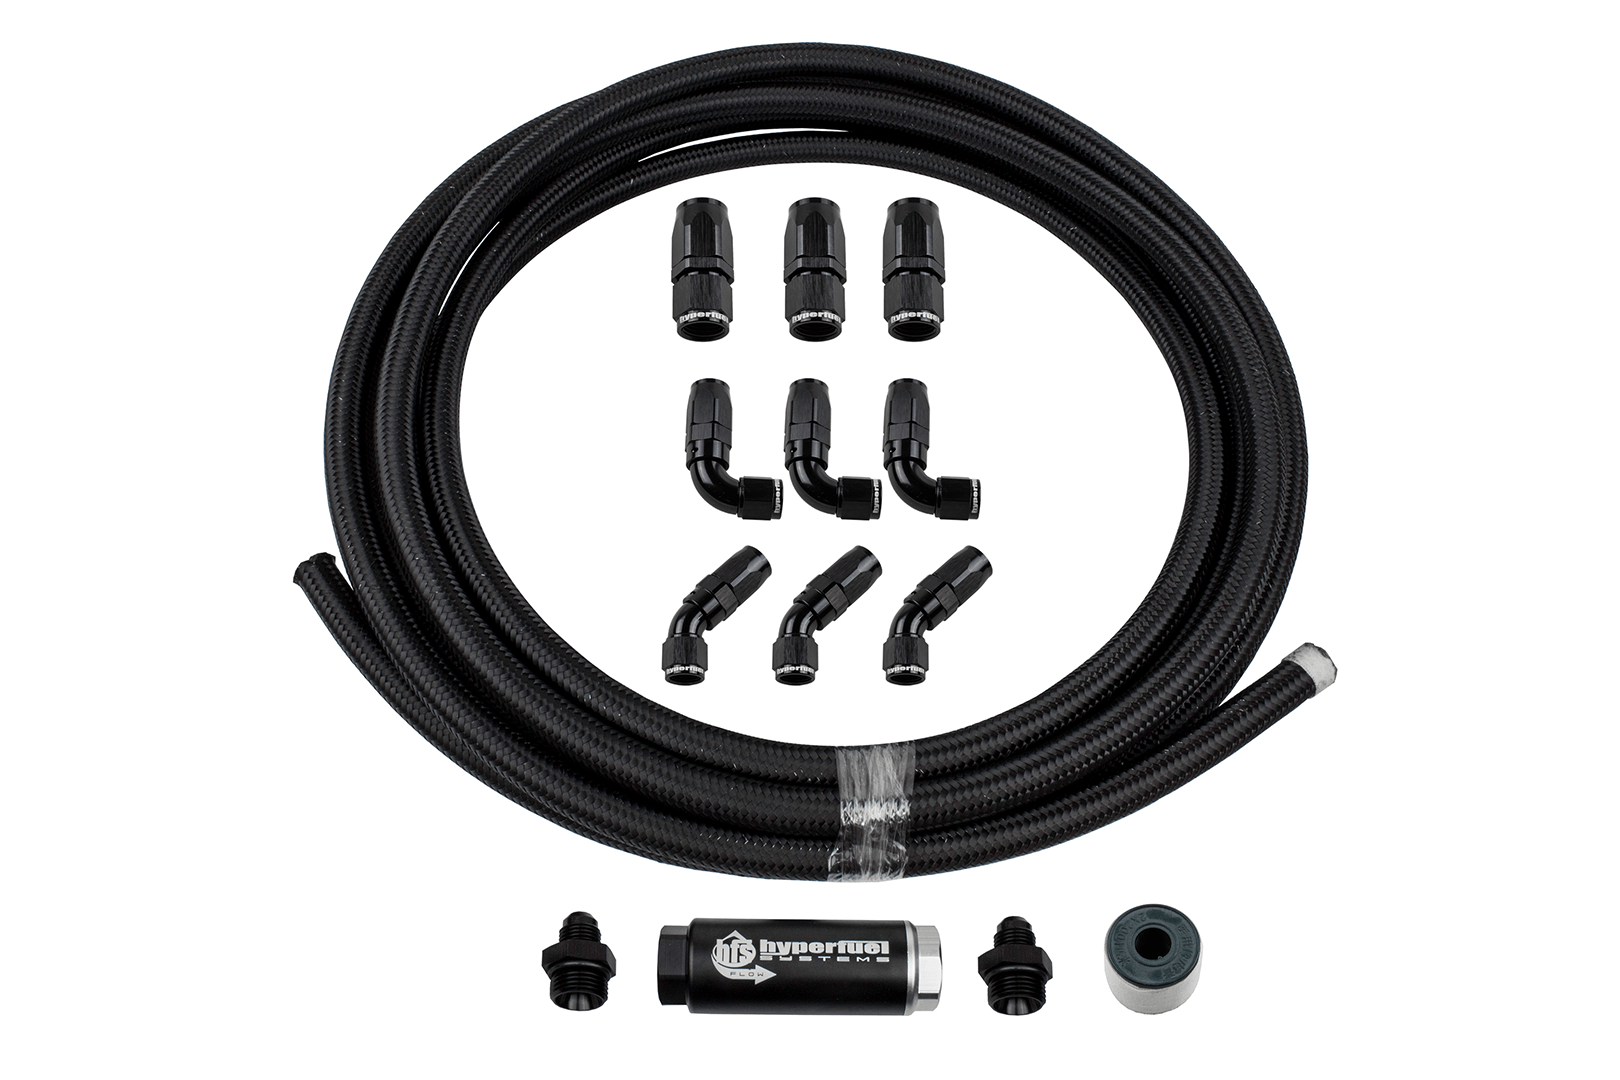 87202 - 20' Black Stainless Steel Hose Kit w/ Fuel Filter and full flow fittings - Hyperfuel